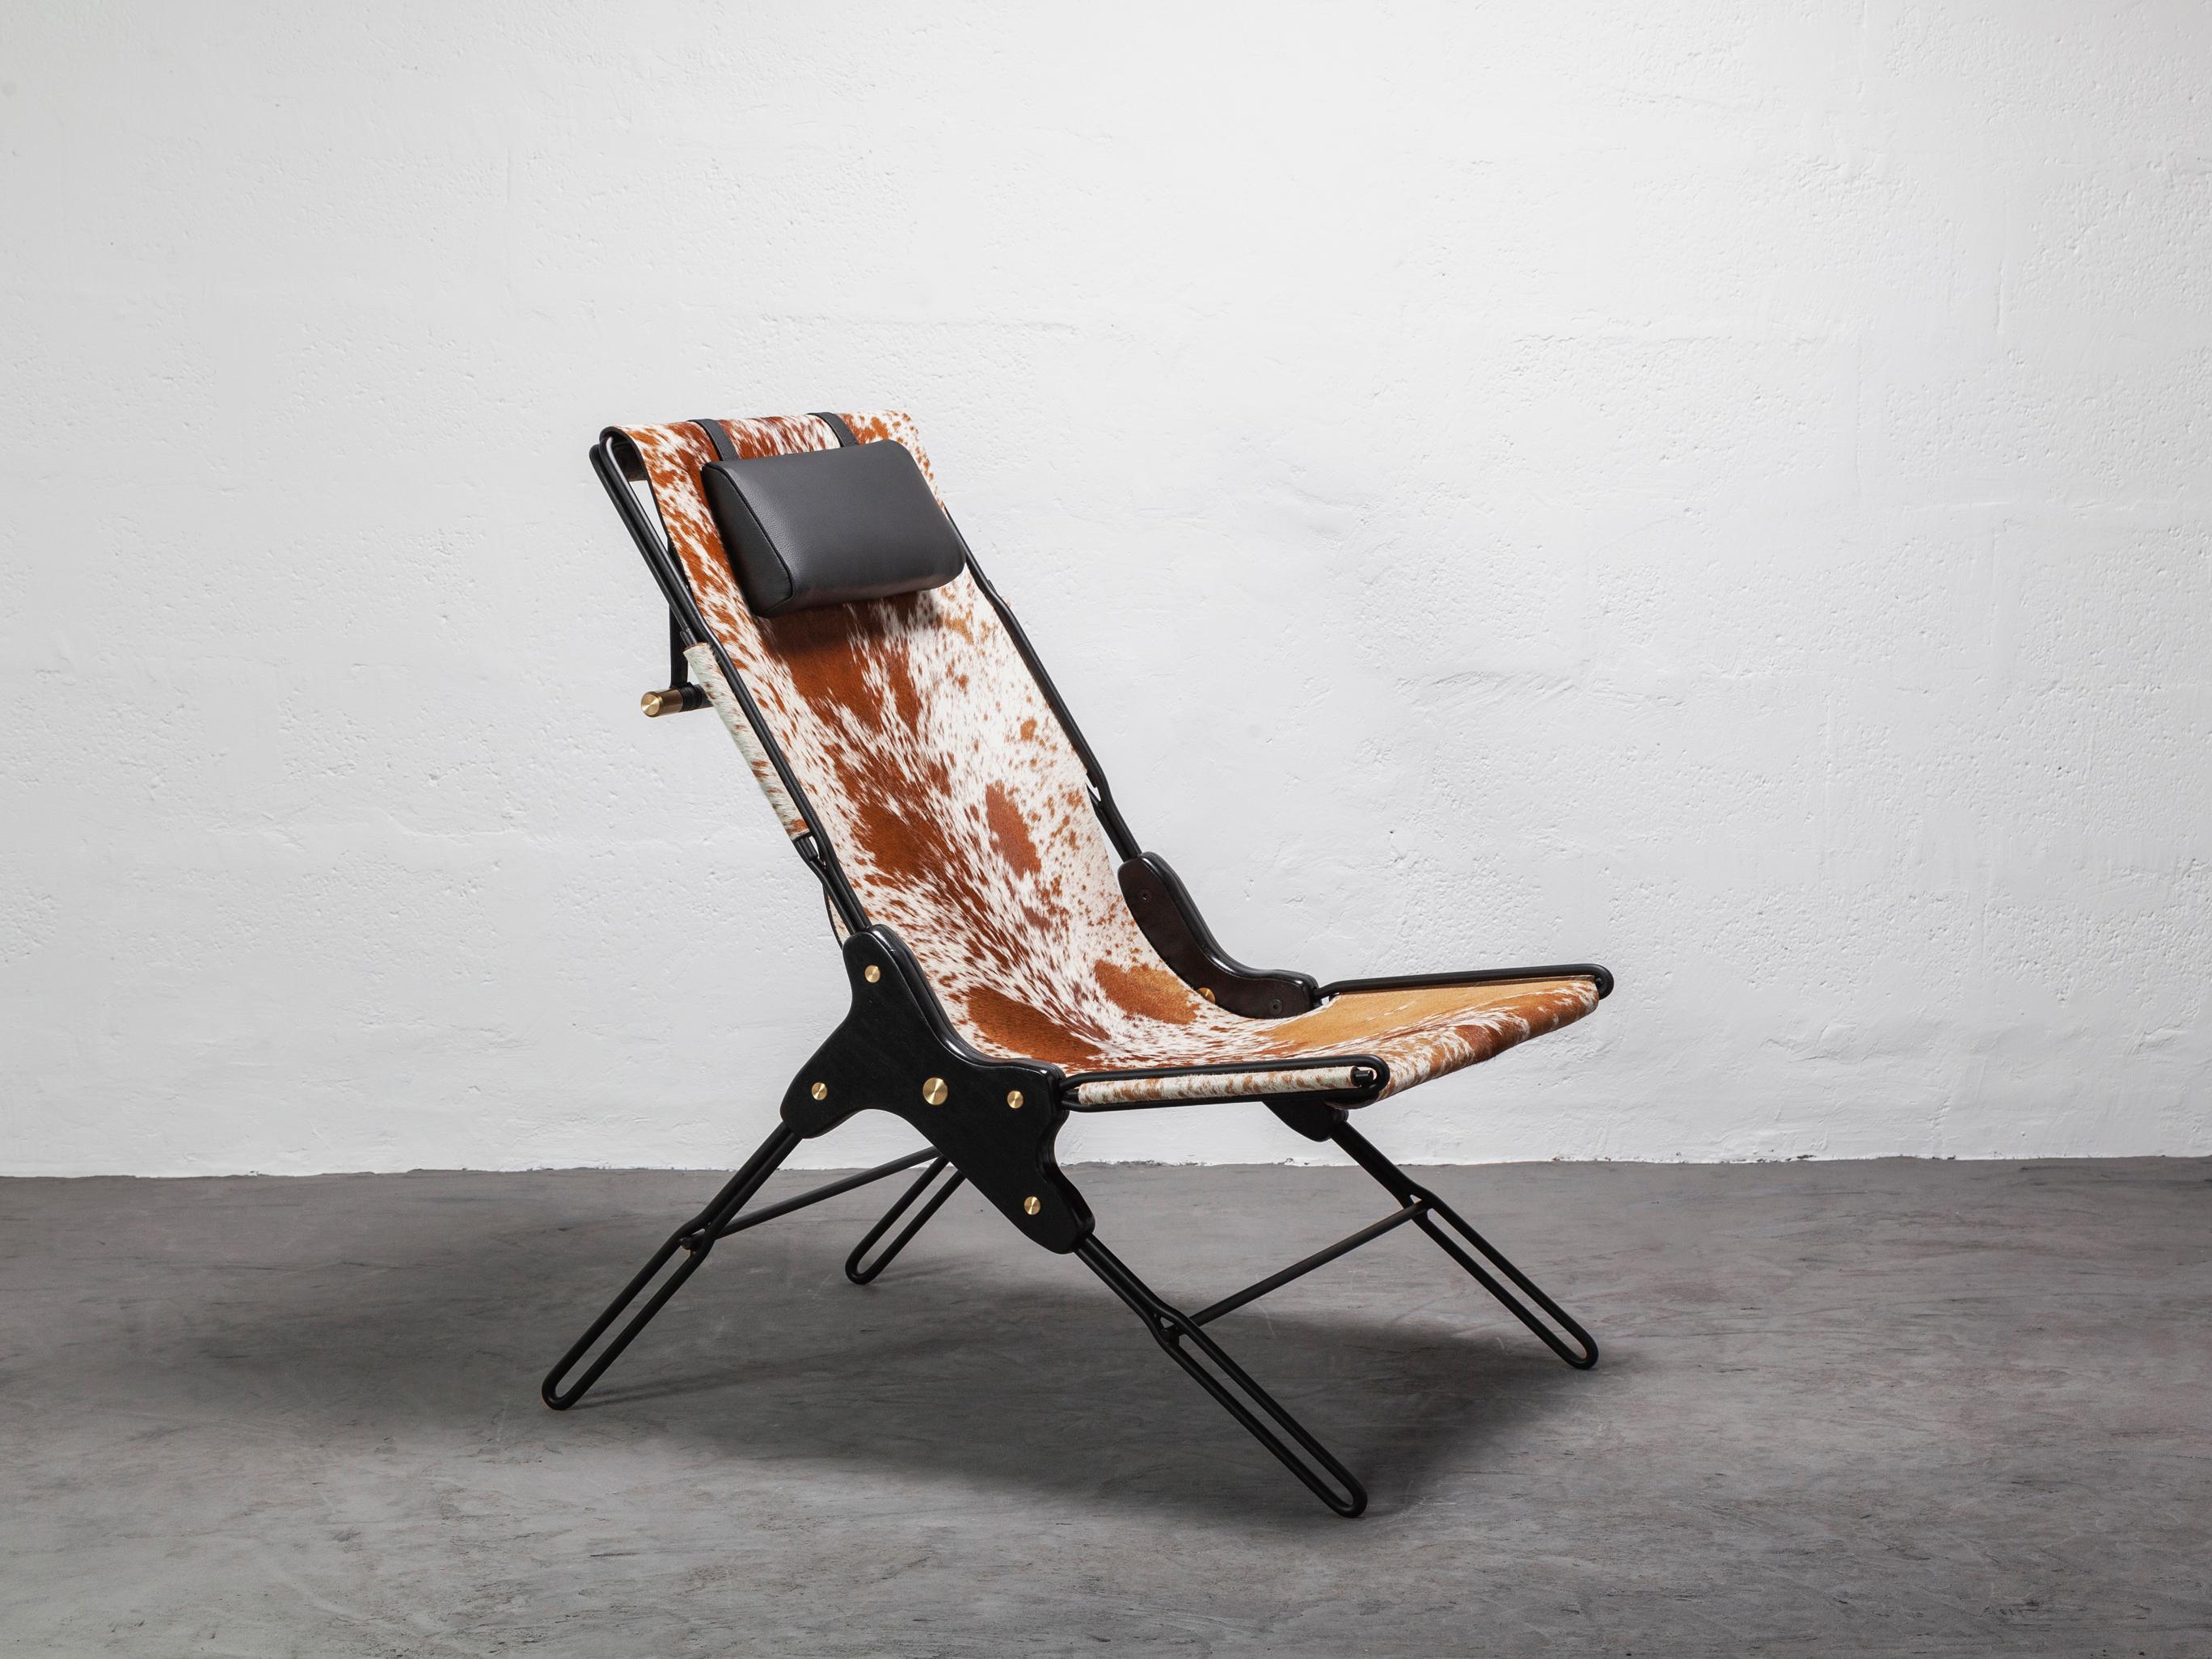 One-of-a-kind lounge chair made of steel rod structure and solid colorado wood with a natural oil finish, Ecuadorian sustainable cowhide leather seat, and lathed bronze or stainless steel hardware.

The first Perfidia collection, composed of 4